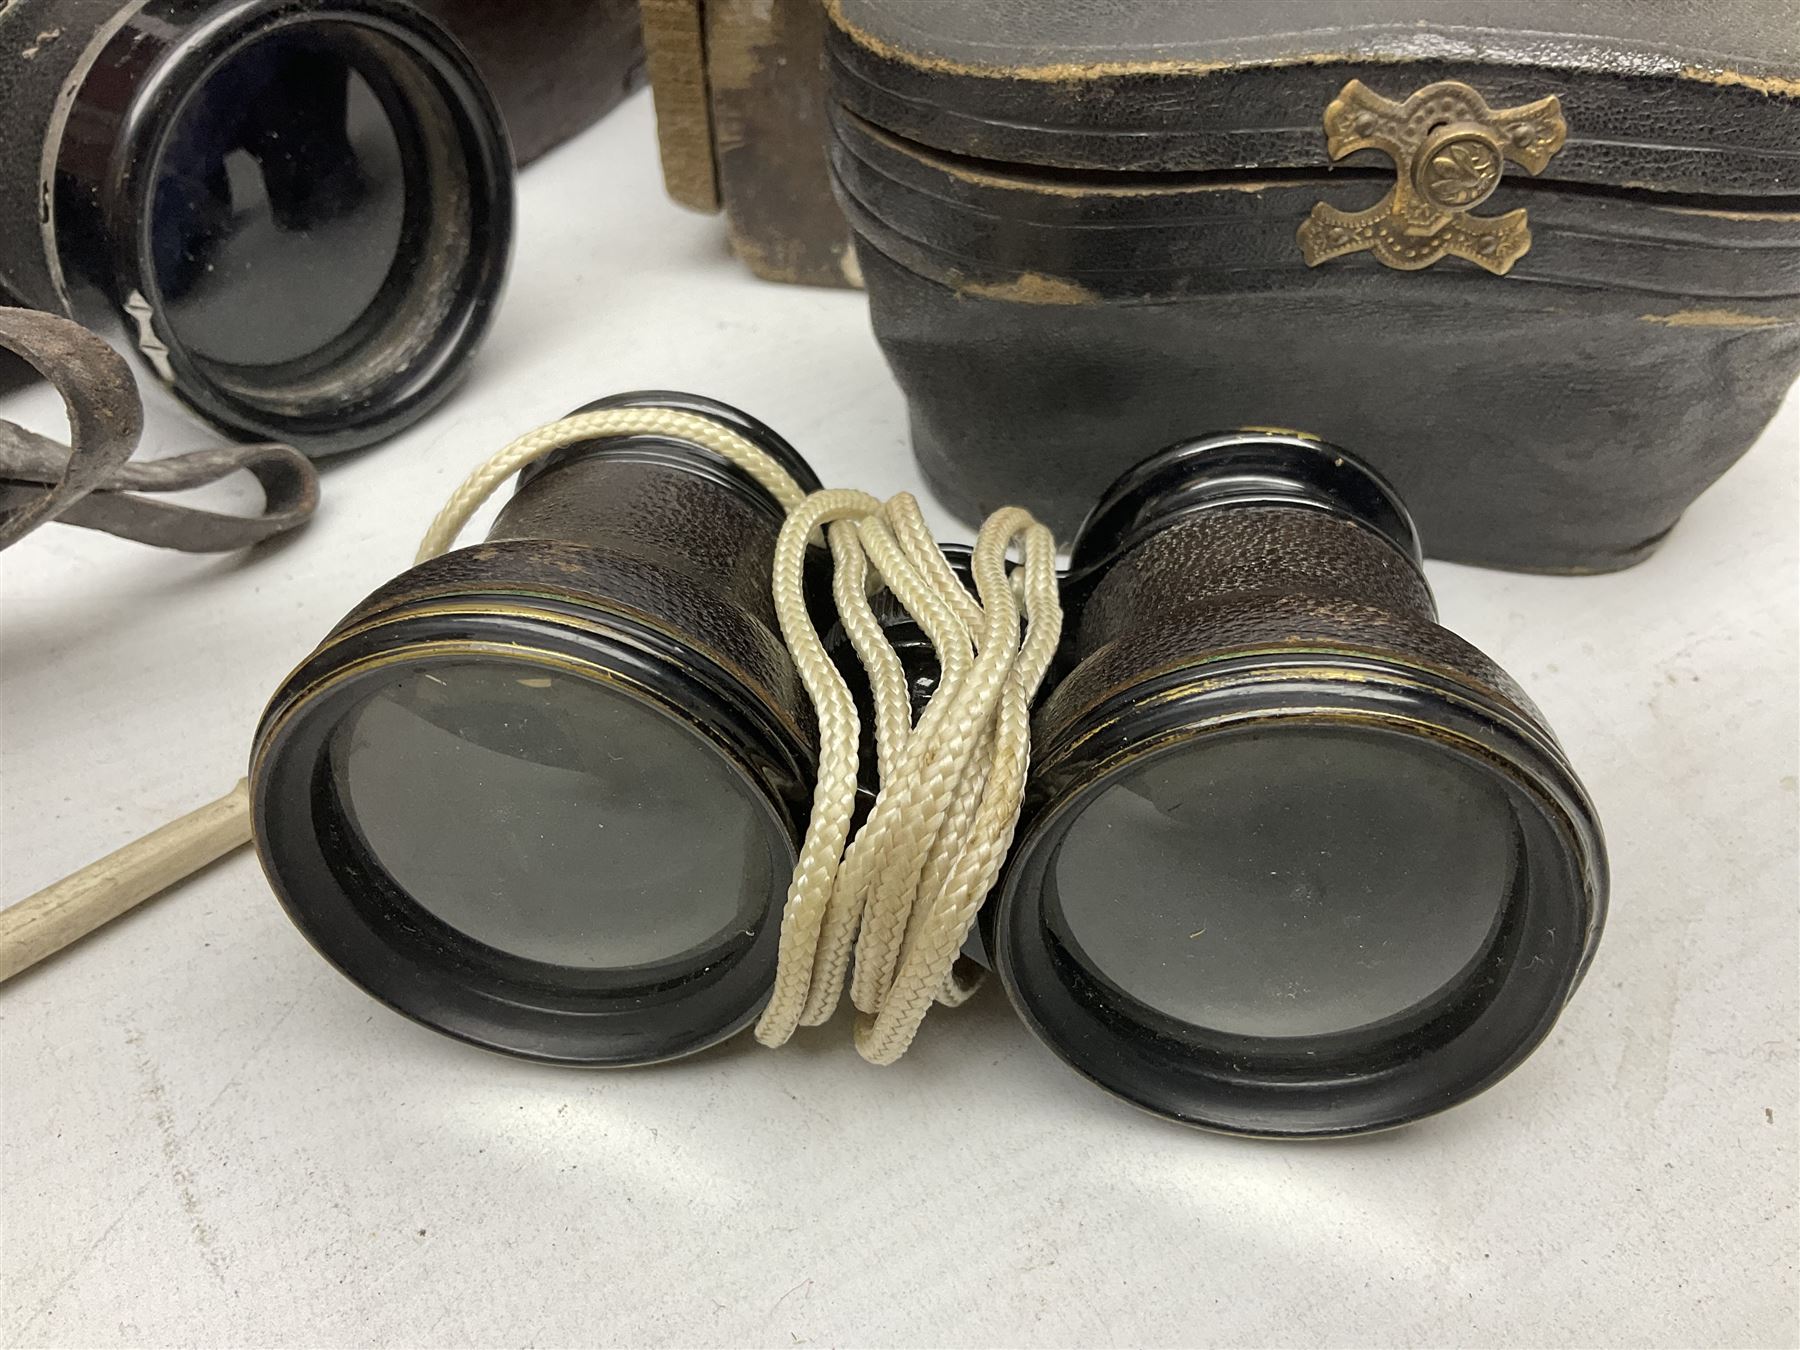 Pair of Lemaire Fabi of Paris mother of pearl opera glasses - Image 2 of 11